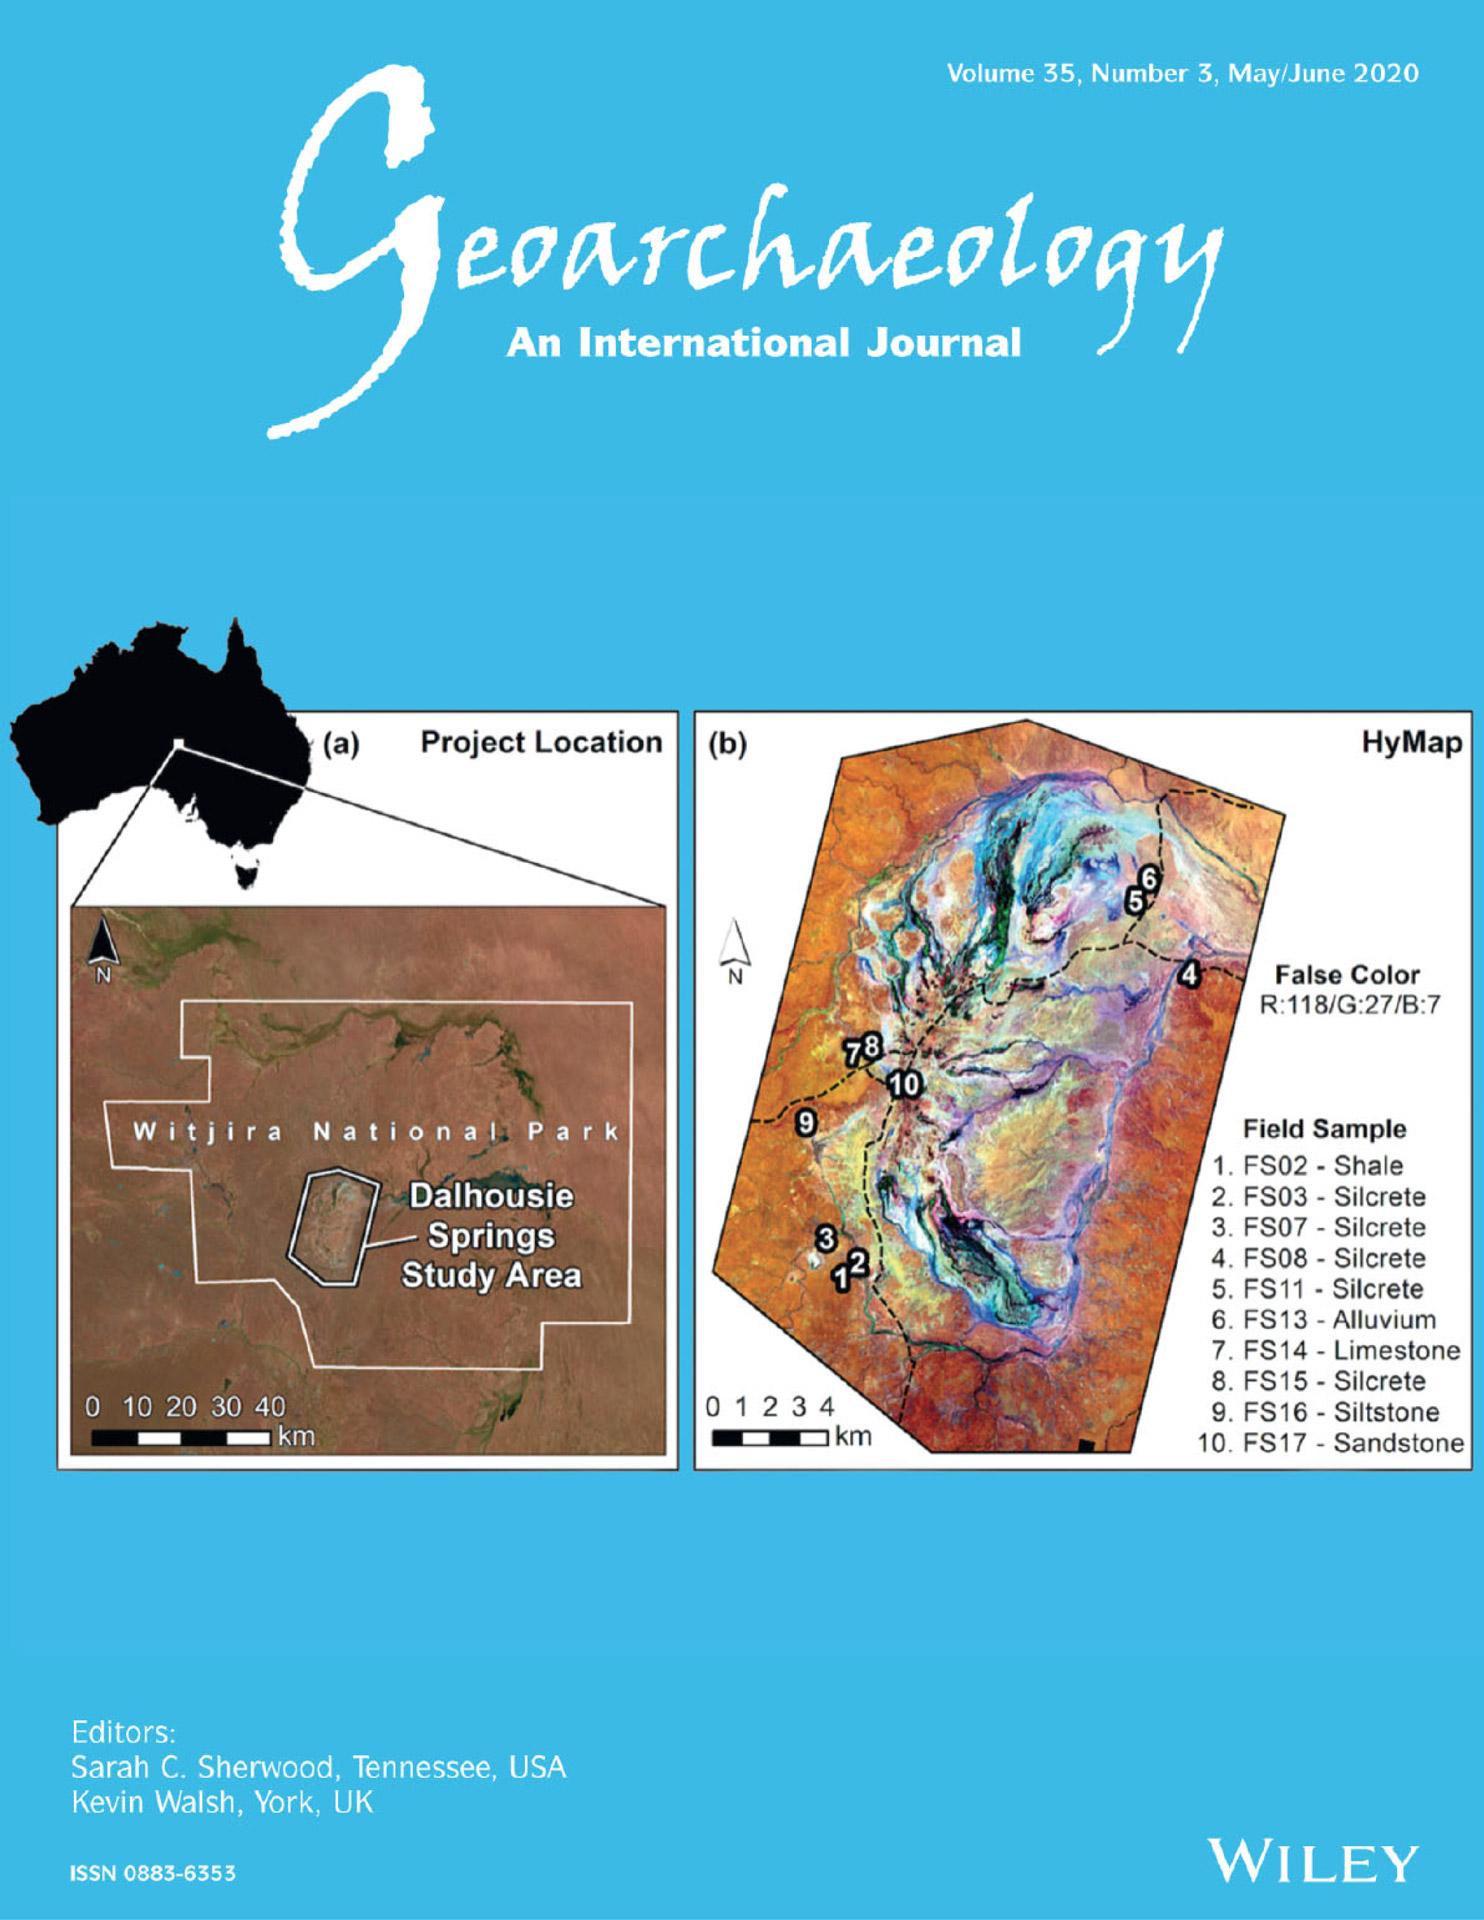 Geoarchaeology journal cover May/June 2020